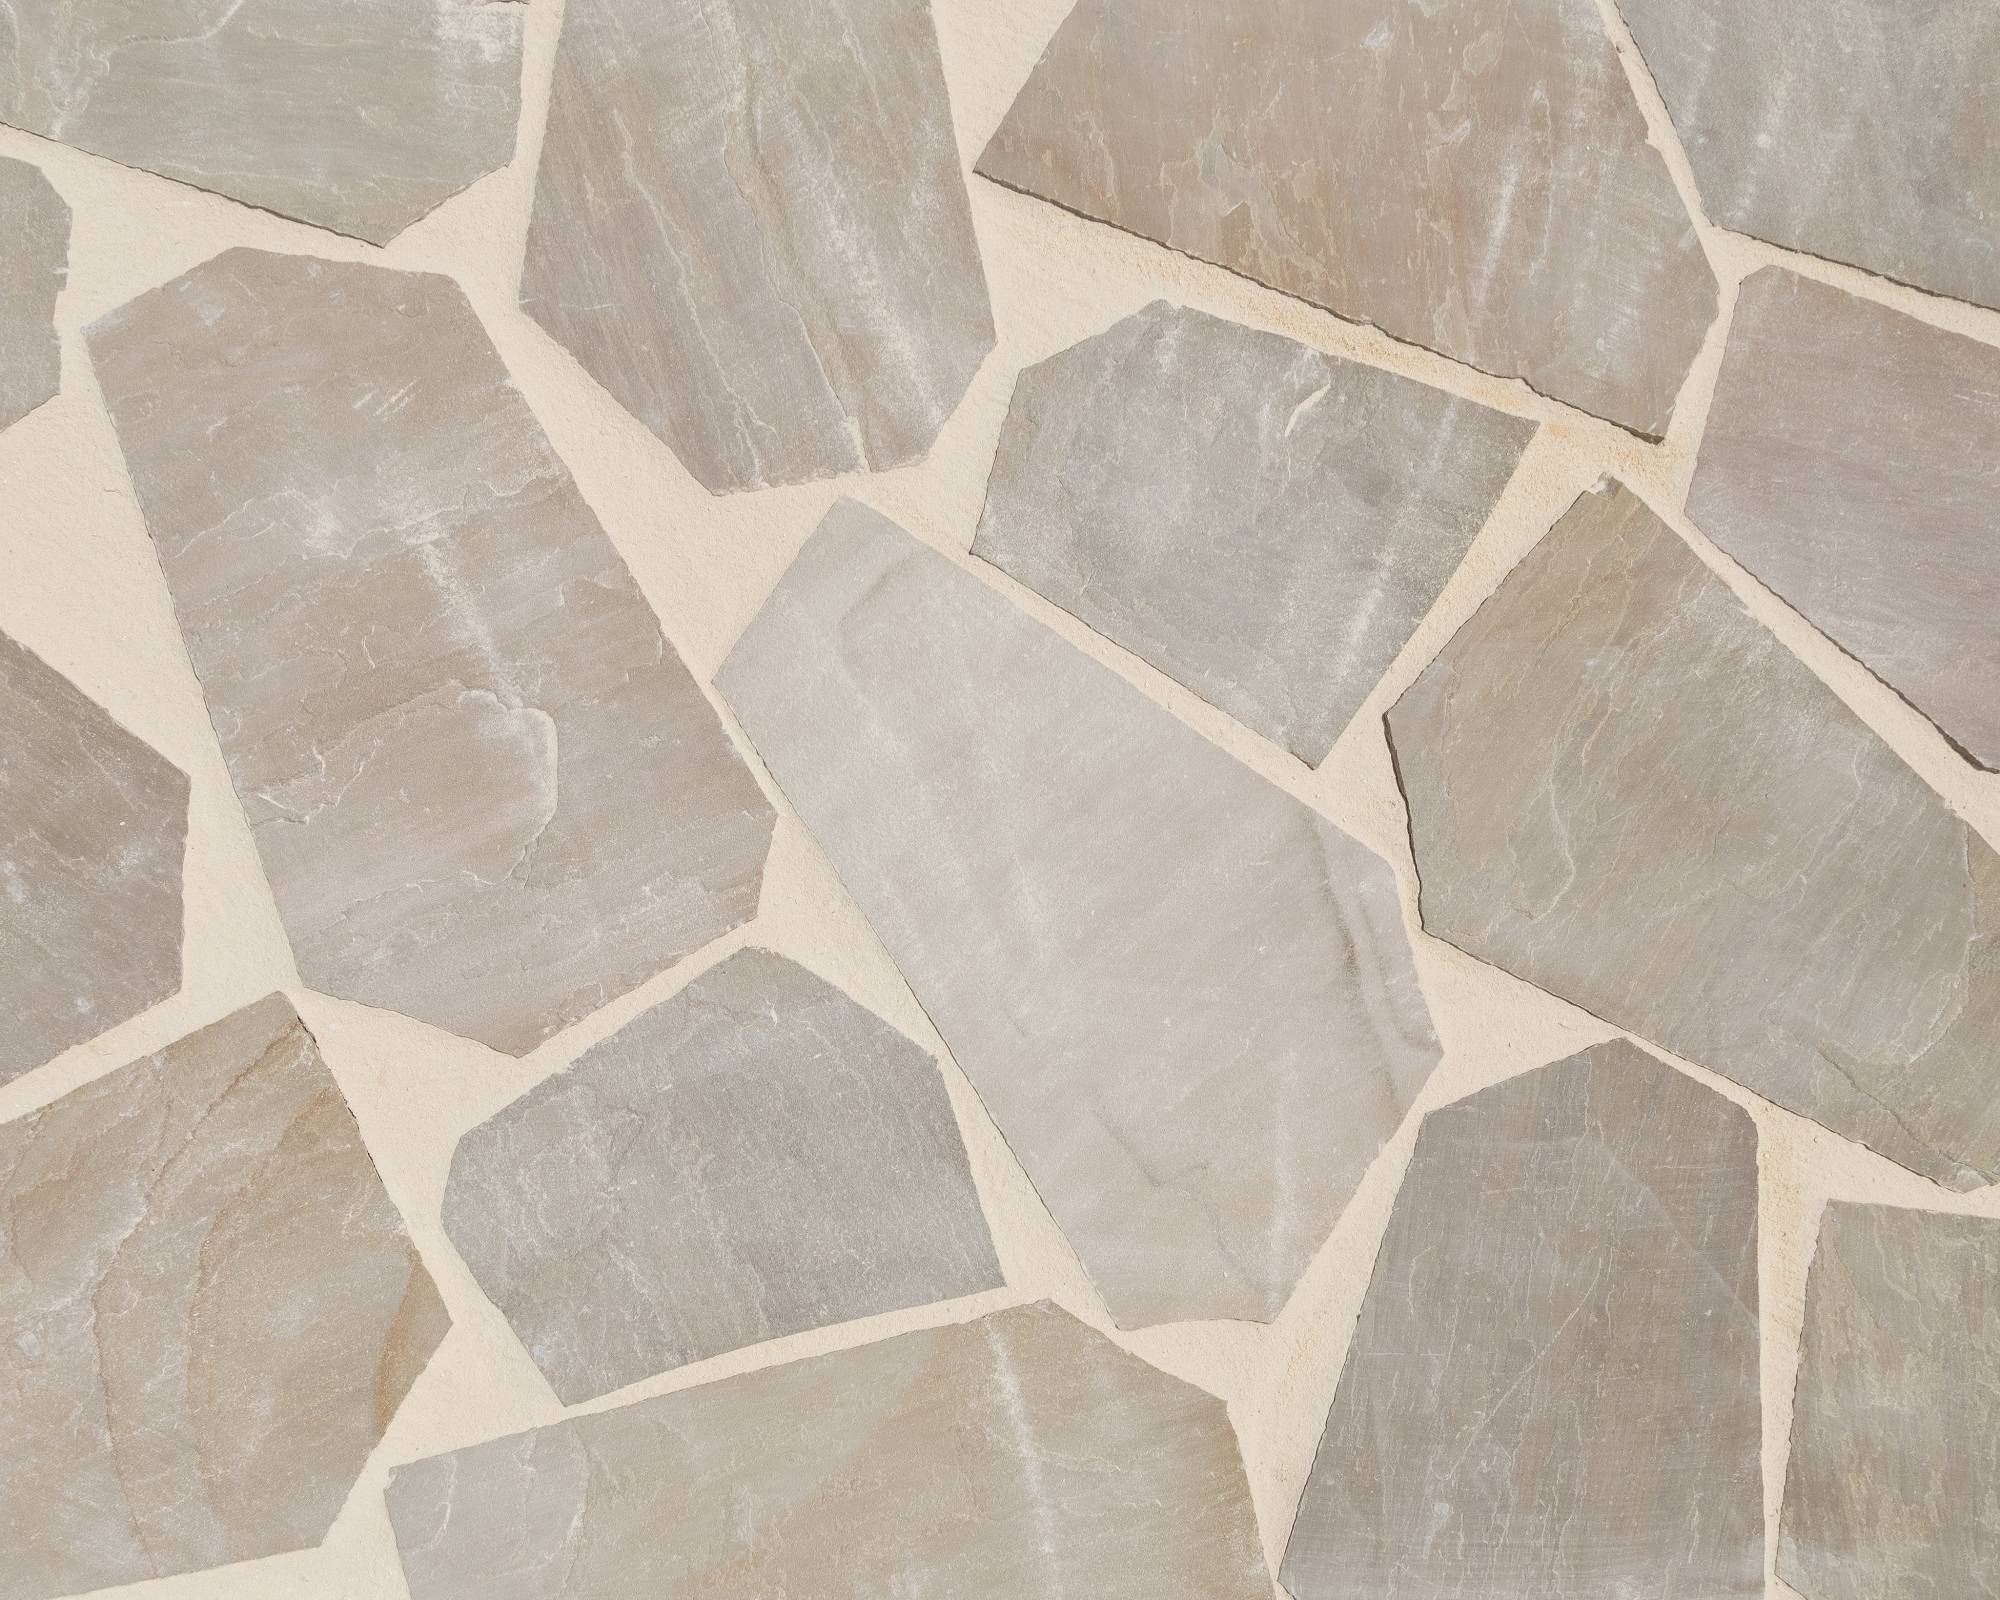 tennessee tan natural stone outdoor paver tile irregular patio pack for patio walkway pool area distributed by surface group manufactured by f and m supply